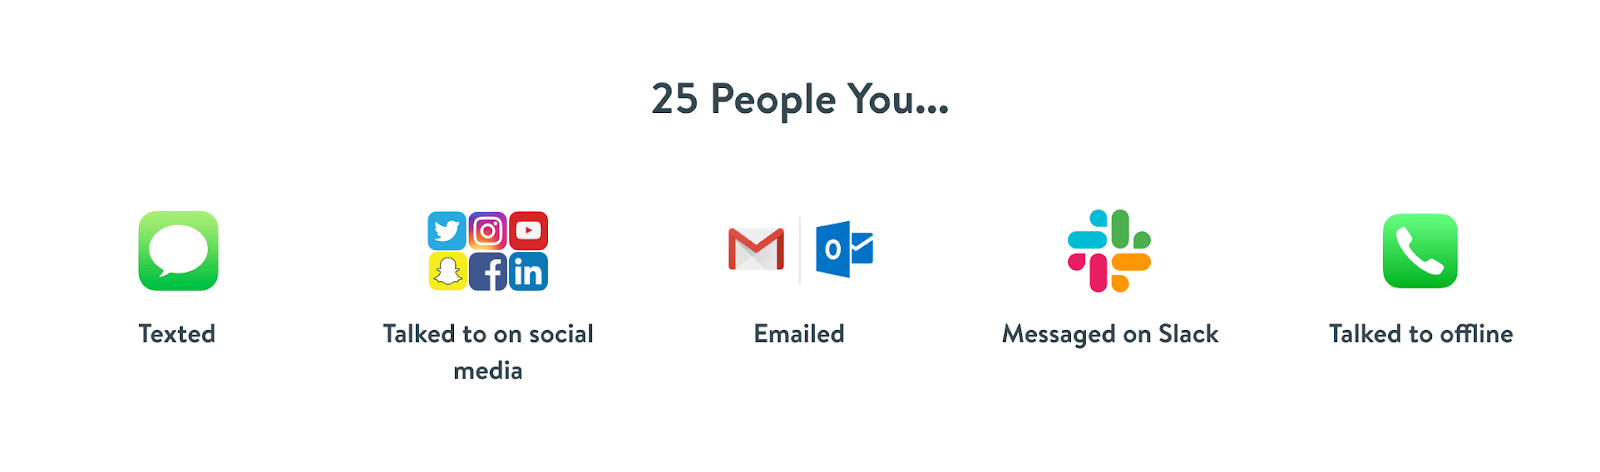 25 people you: texted, talked to on social media, emailed, messaged on Slack, talked to offline